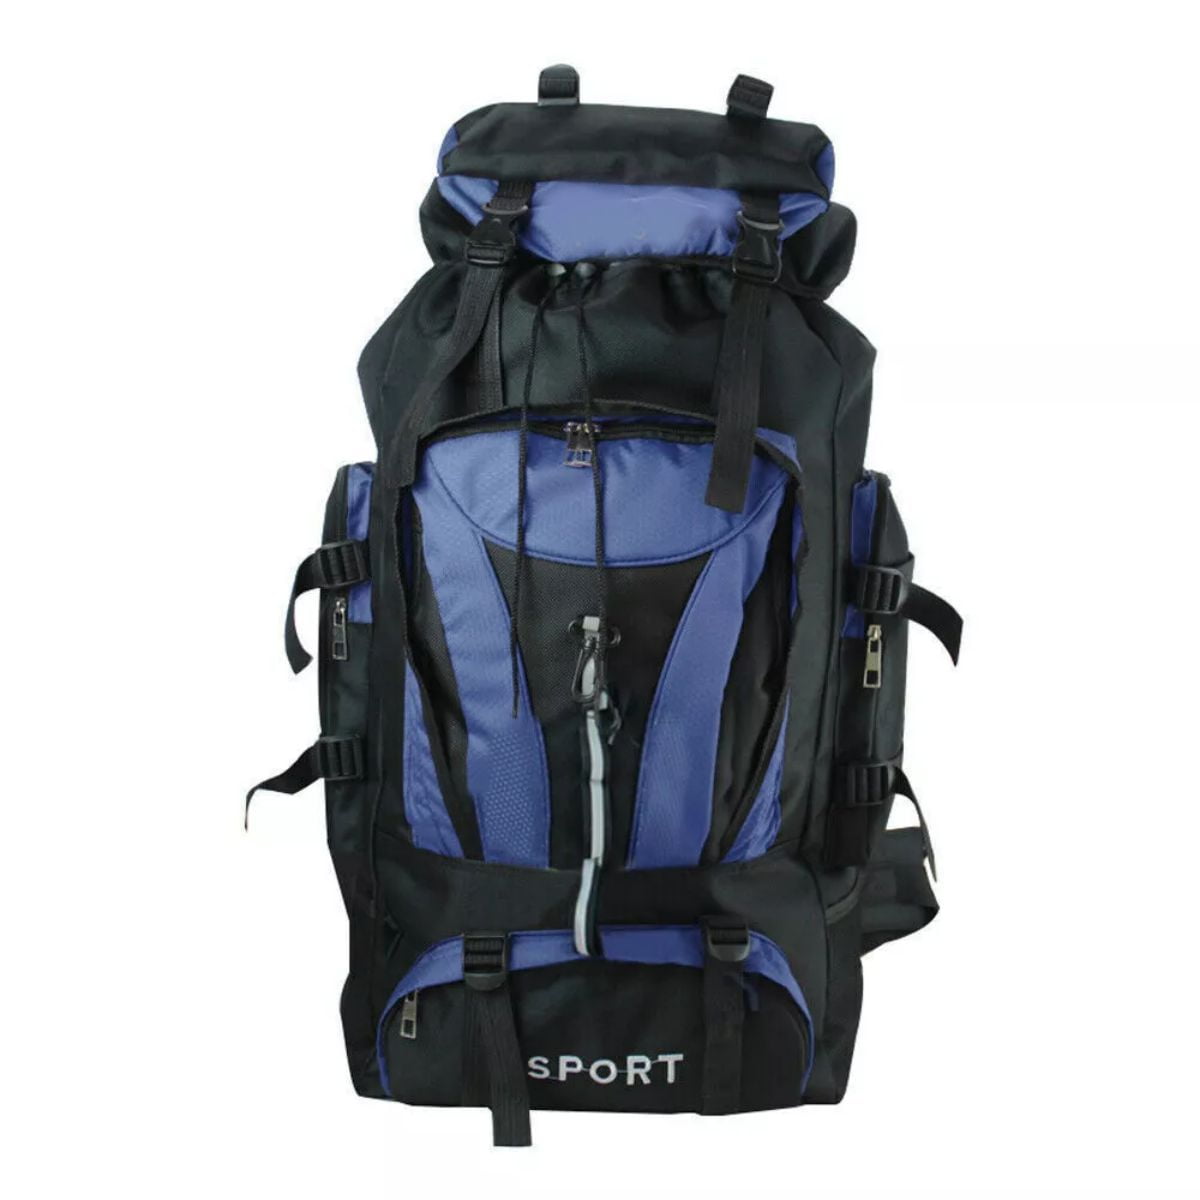 WSYW 70L Outdoor Camping Hiking Backpack Men Women Travel Climbing ...